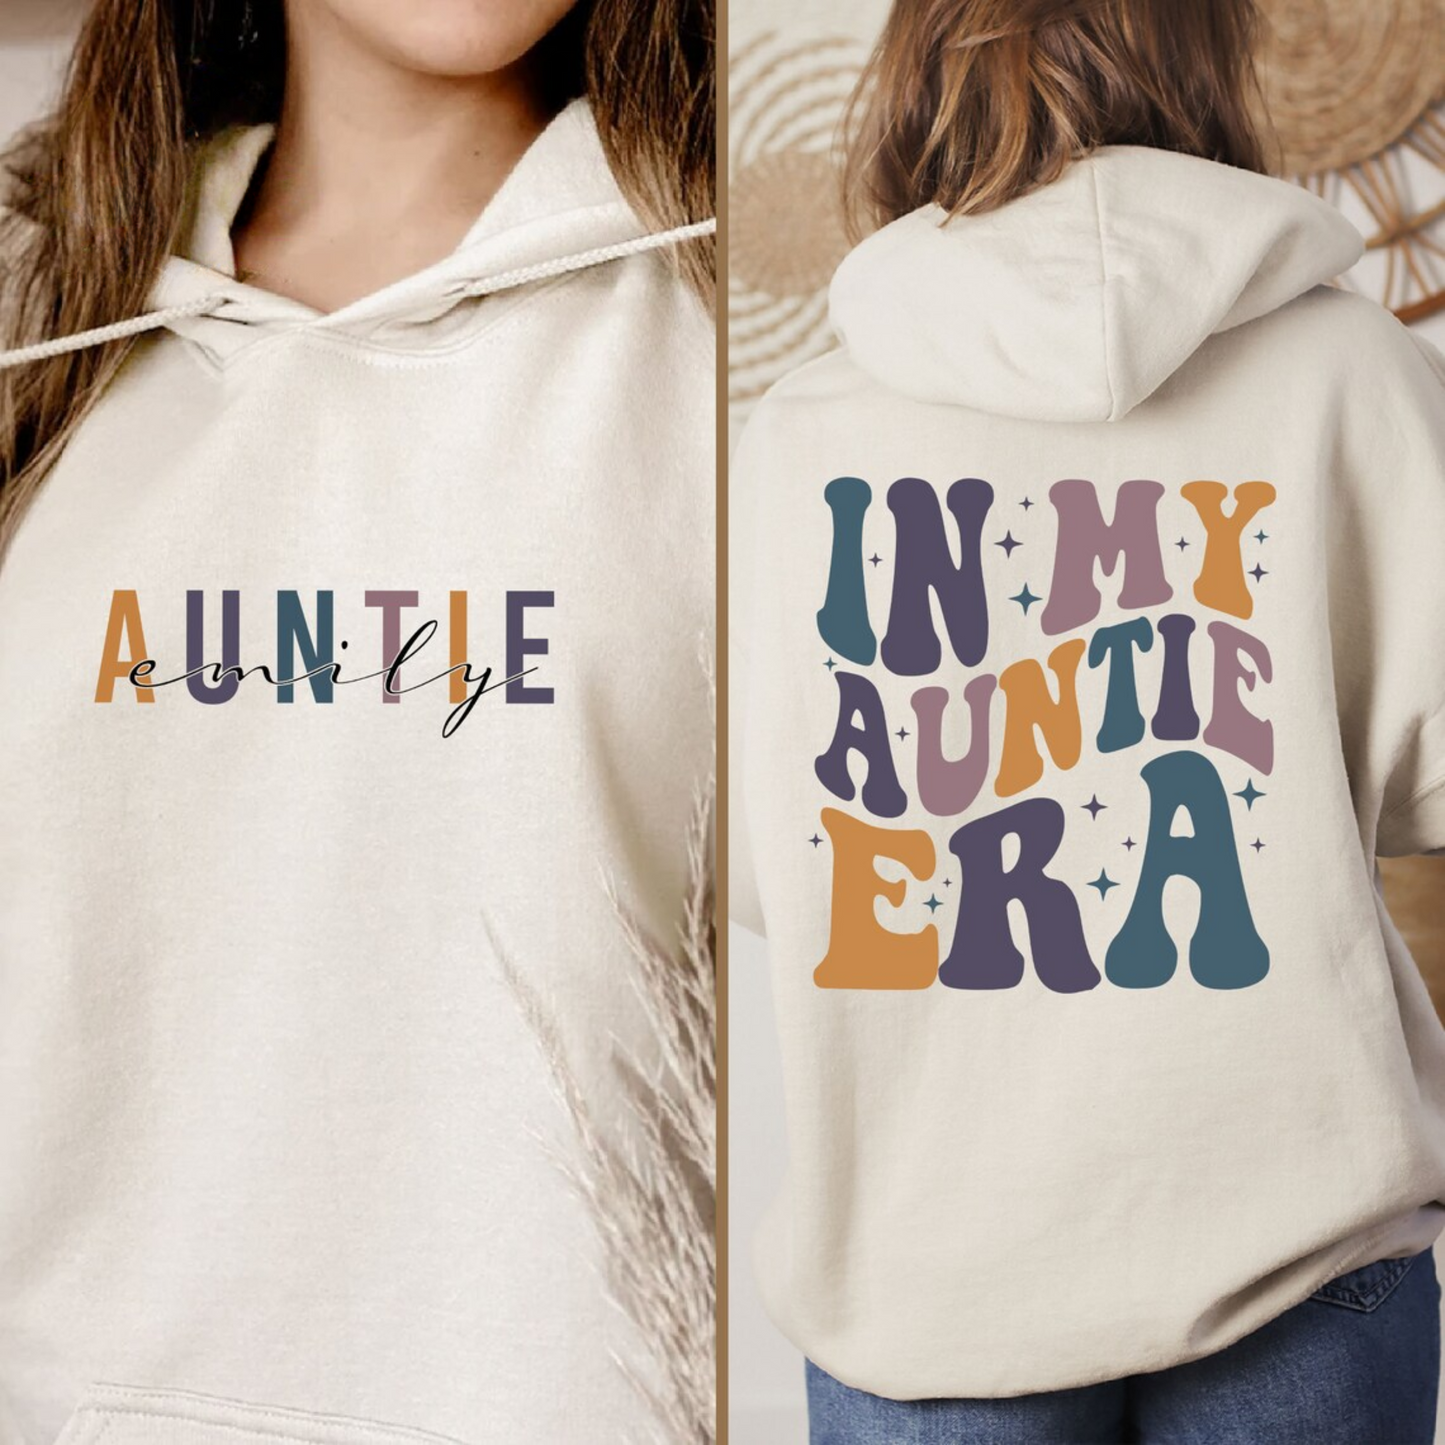 Custom Aunt's Joy Shirt - Personalize with Auntie's Name for Her Special Day